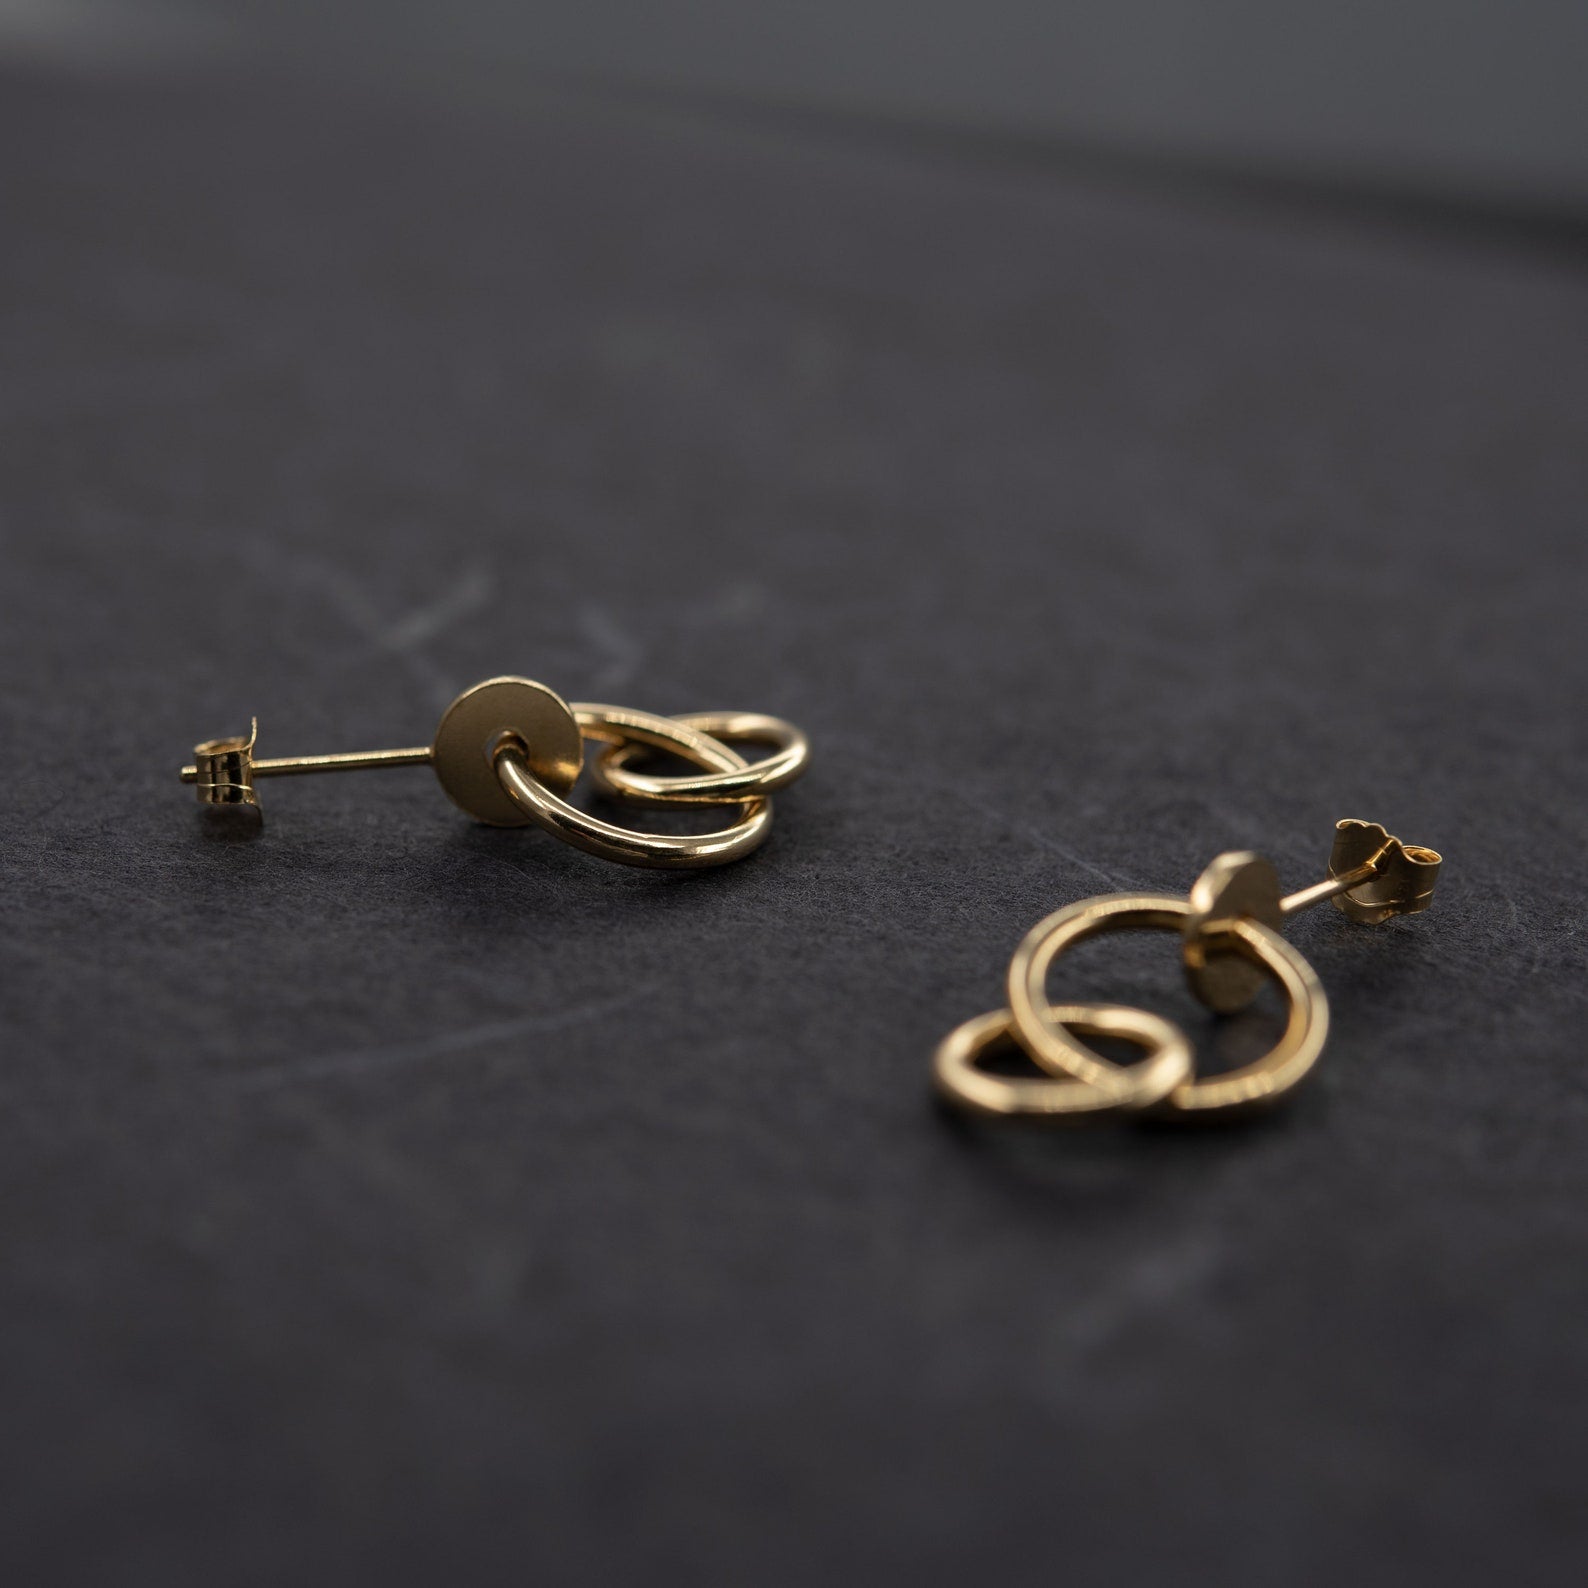 Pair of gold plated studs earrings designed with an interlocking dot and two hoops linked in shiny finish. Handcrafted by a g j c in Paris. The drop length measures 19 millimeters with a total earrings length of 22 millimeters. They can be worn on the ear lobe and attached with push backs. 